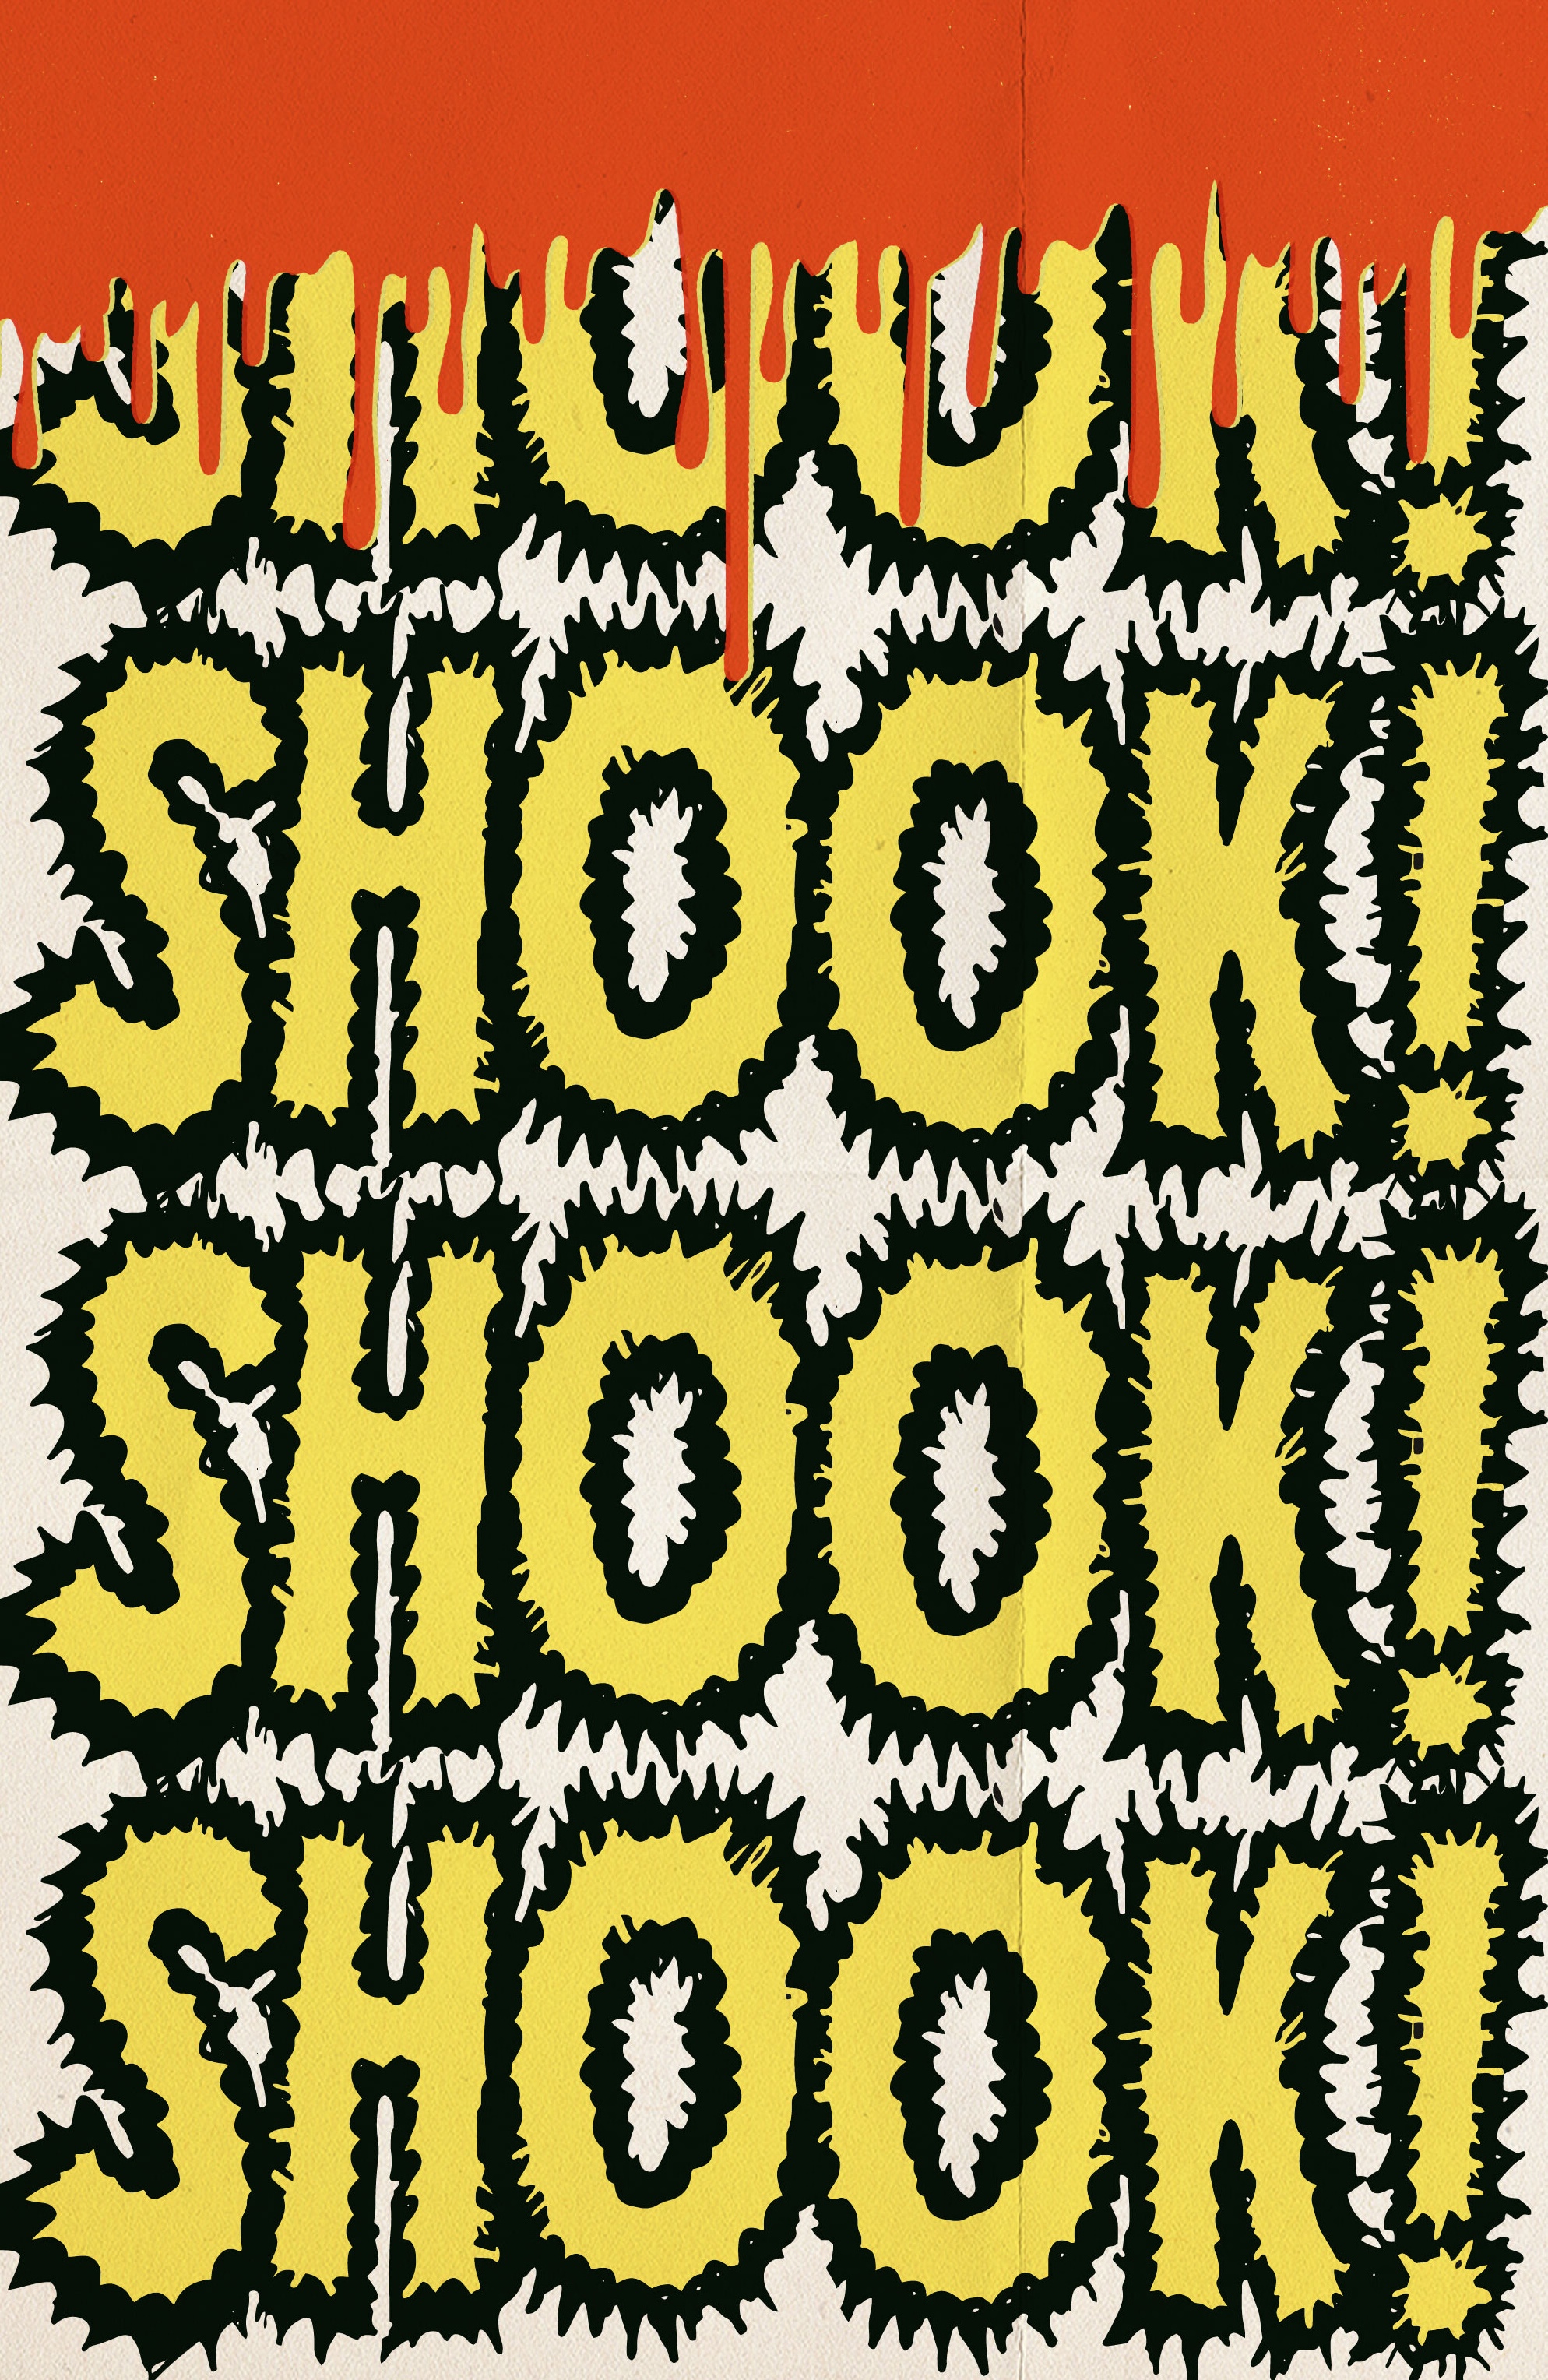 Read online Shook!: A Black Horror Anthology comic -  Issue # TPB (Part 1) - 3